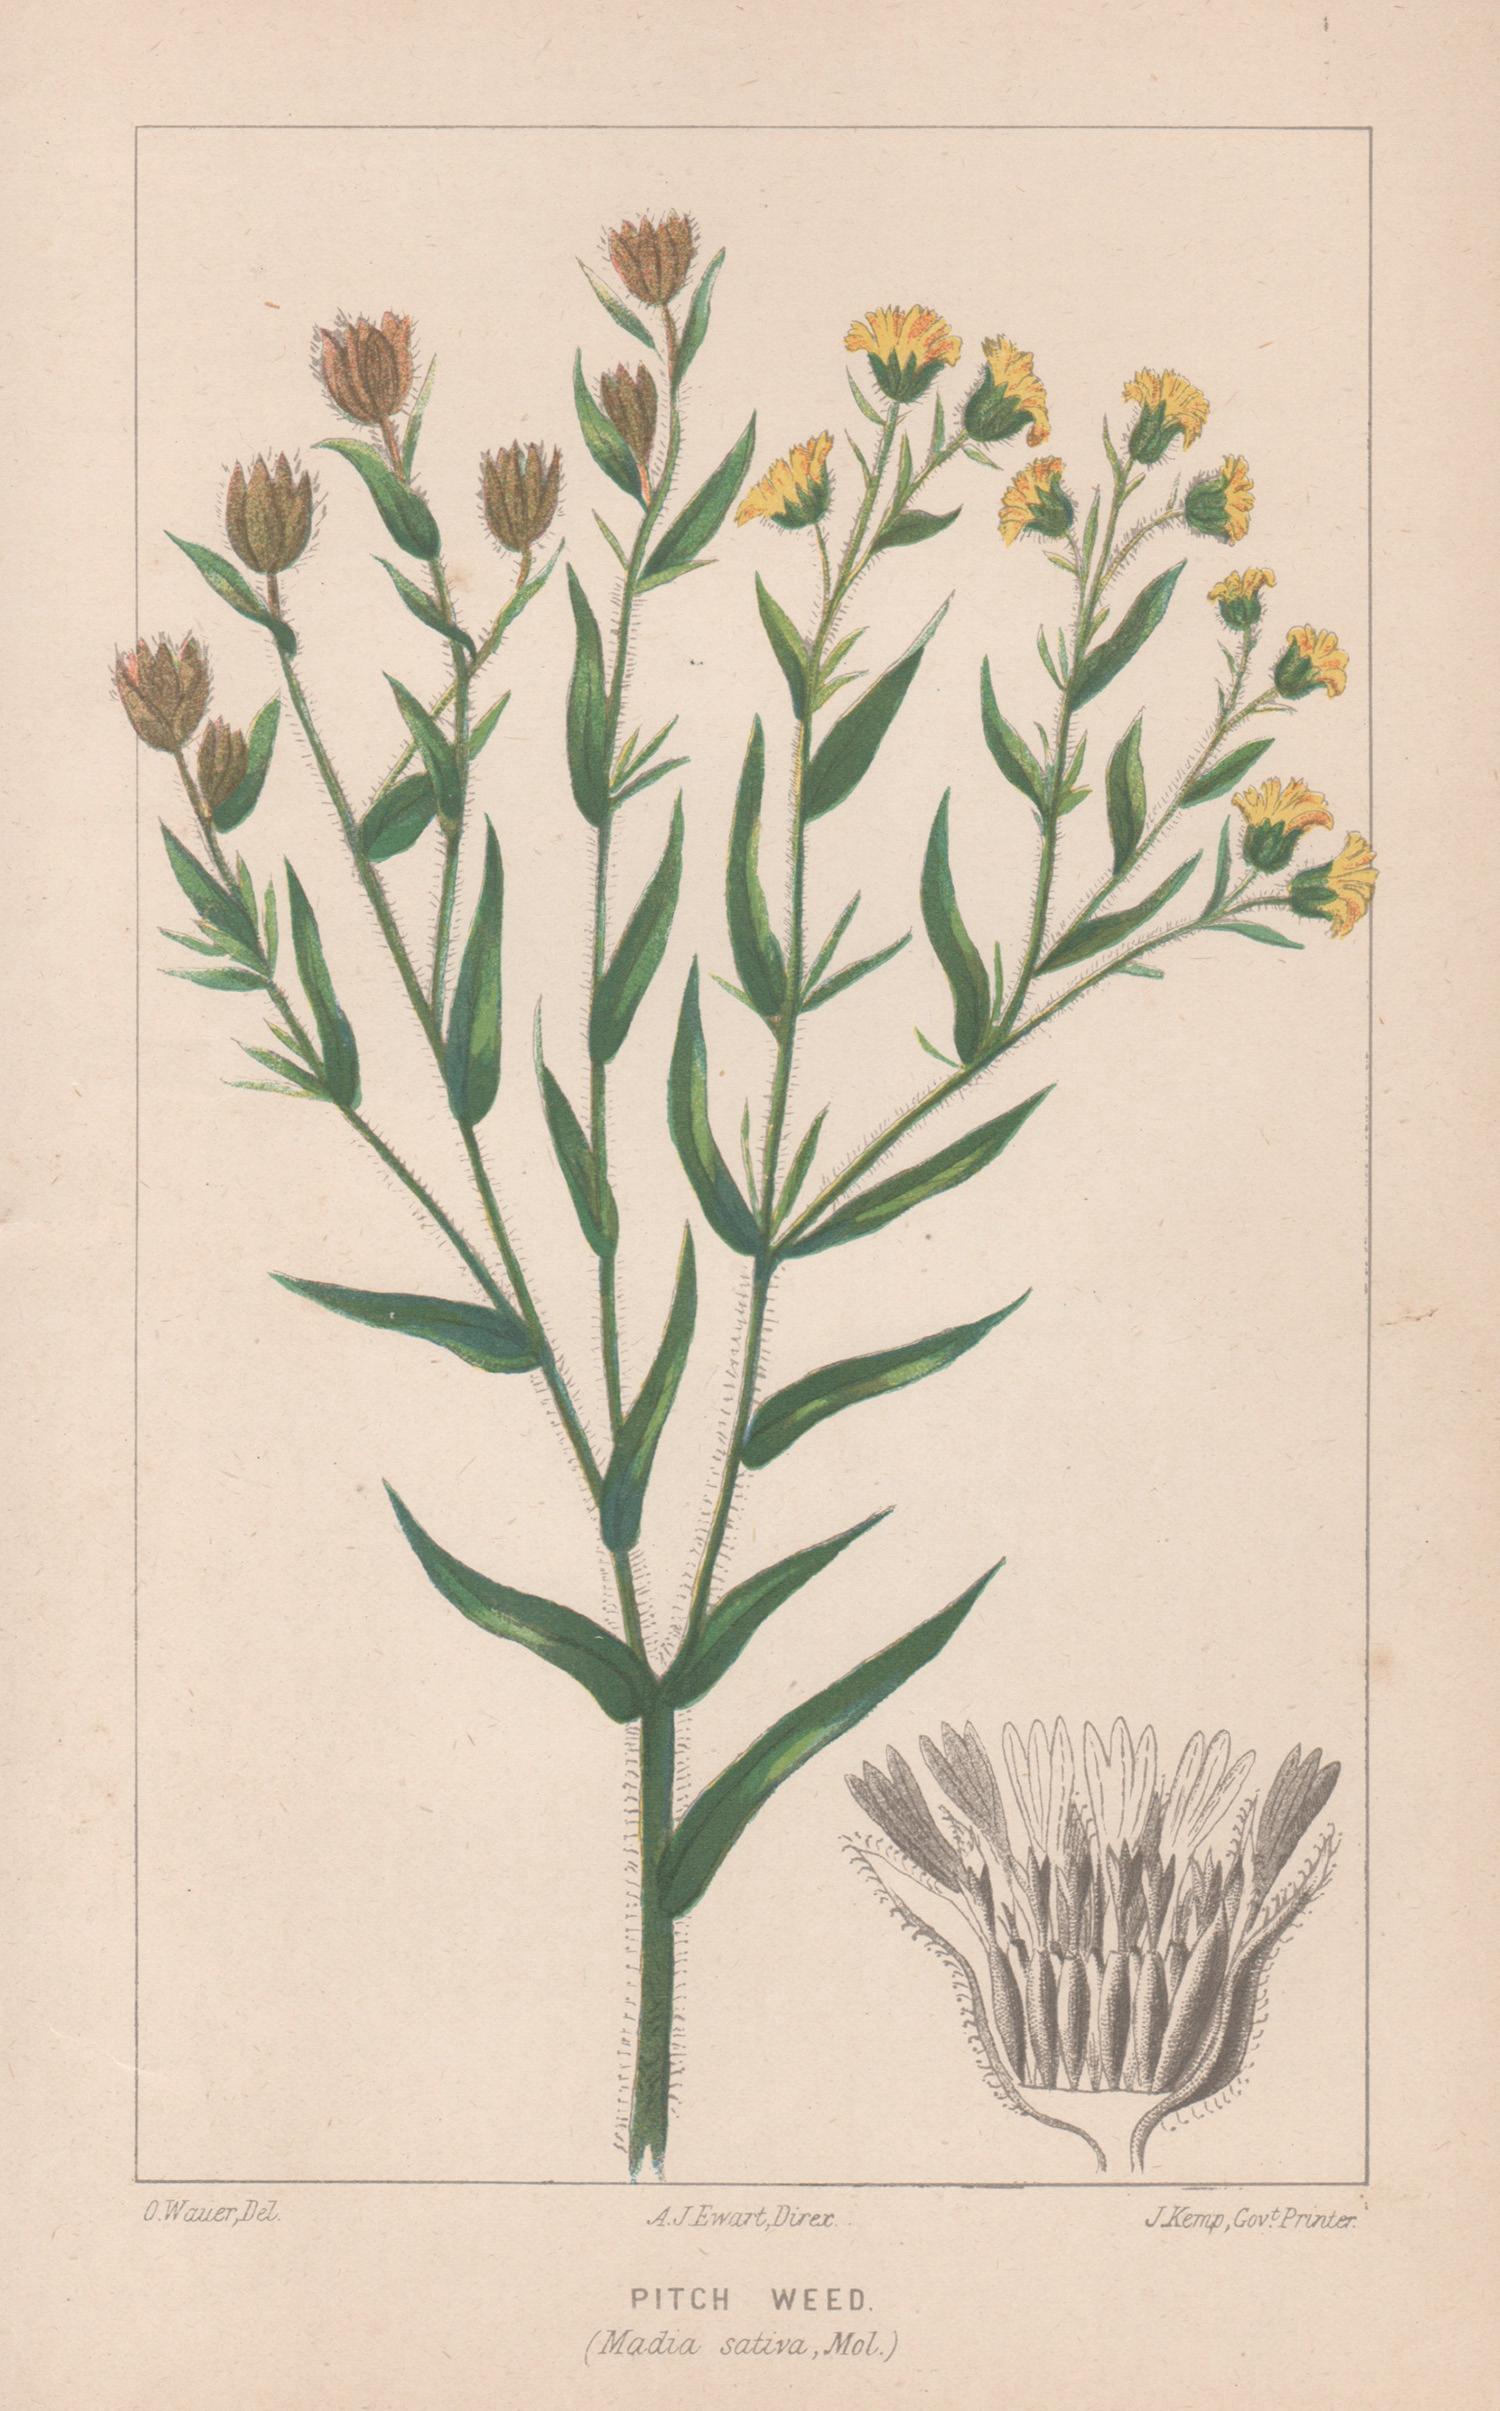 O Wauer Still-Life Print - Pitch Weed (Madia Saliva, Mol), antique botanical plant lithograph